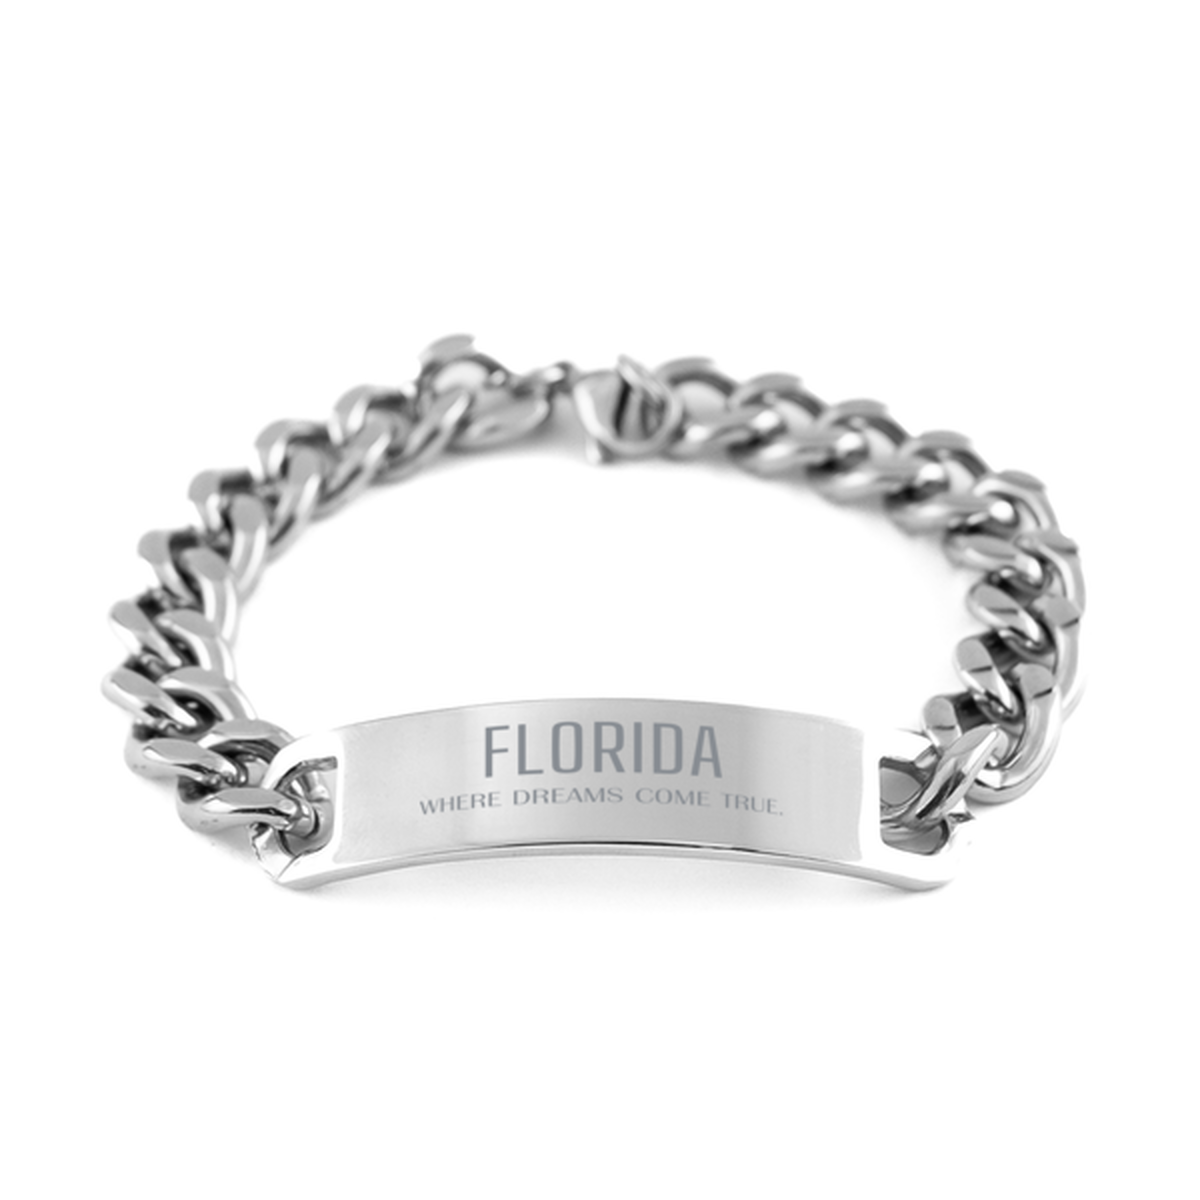 Love Florida State Cuban Chain Stainless Steel Bracelet, Florida Where dreams come true, Birthday Inspirational Gifts For Florida Men, Women, Friends